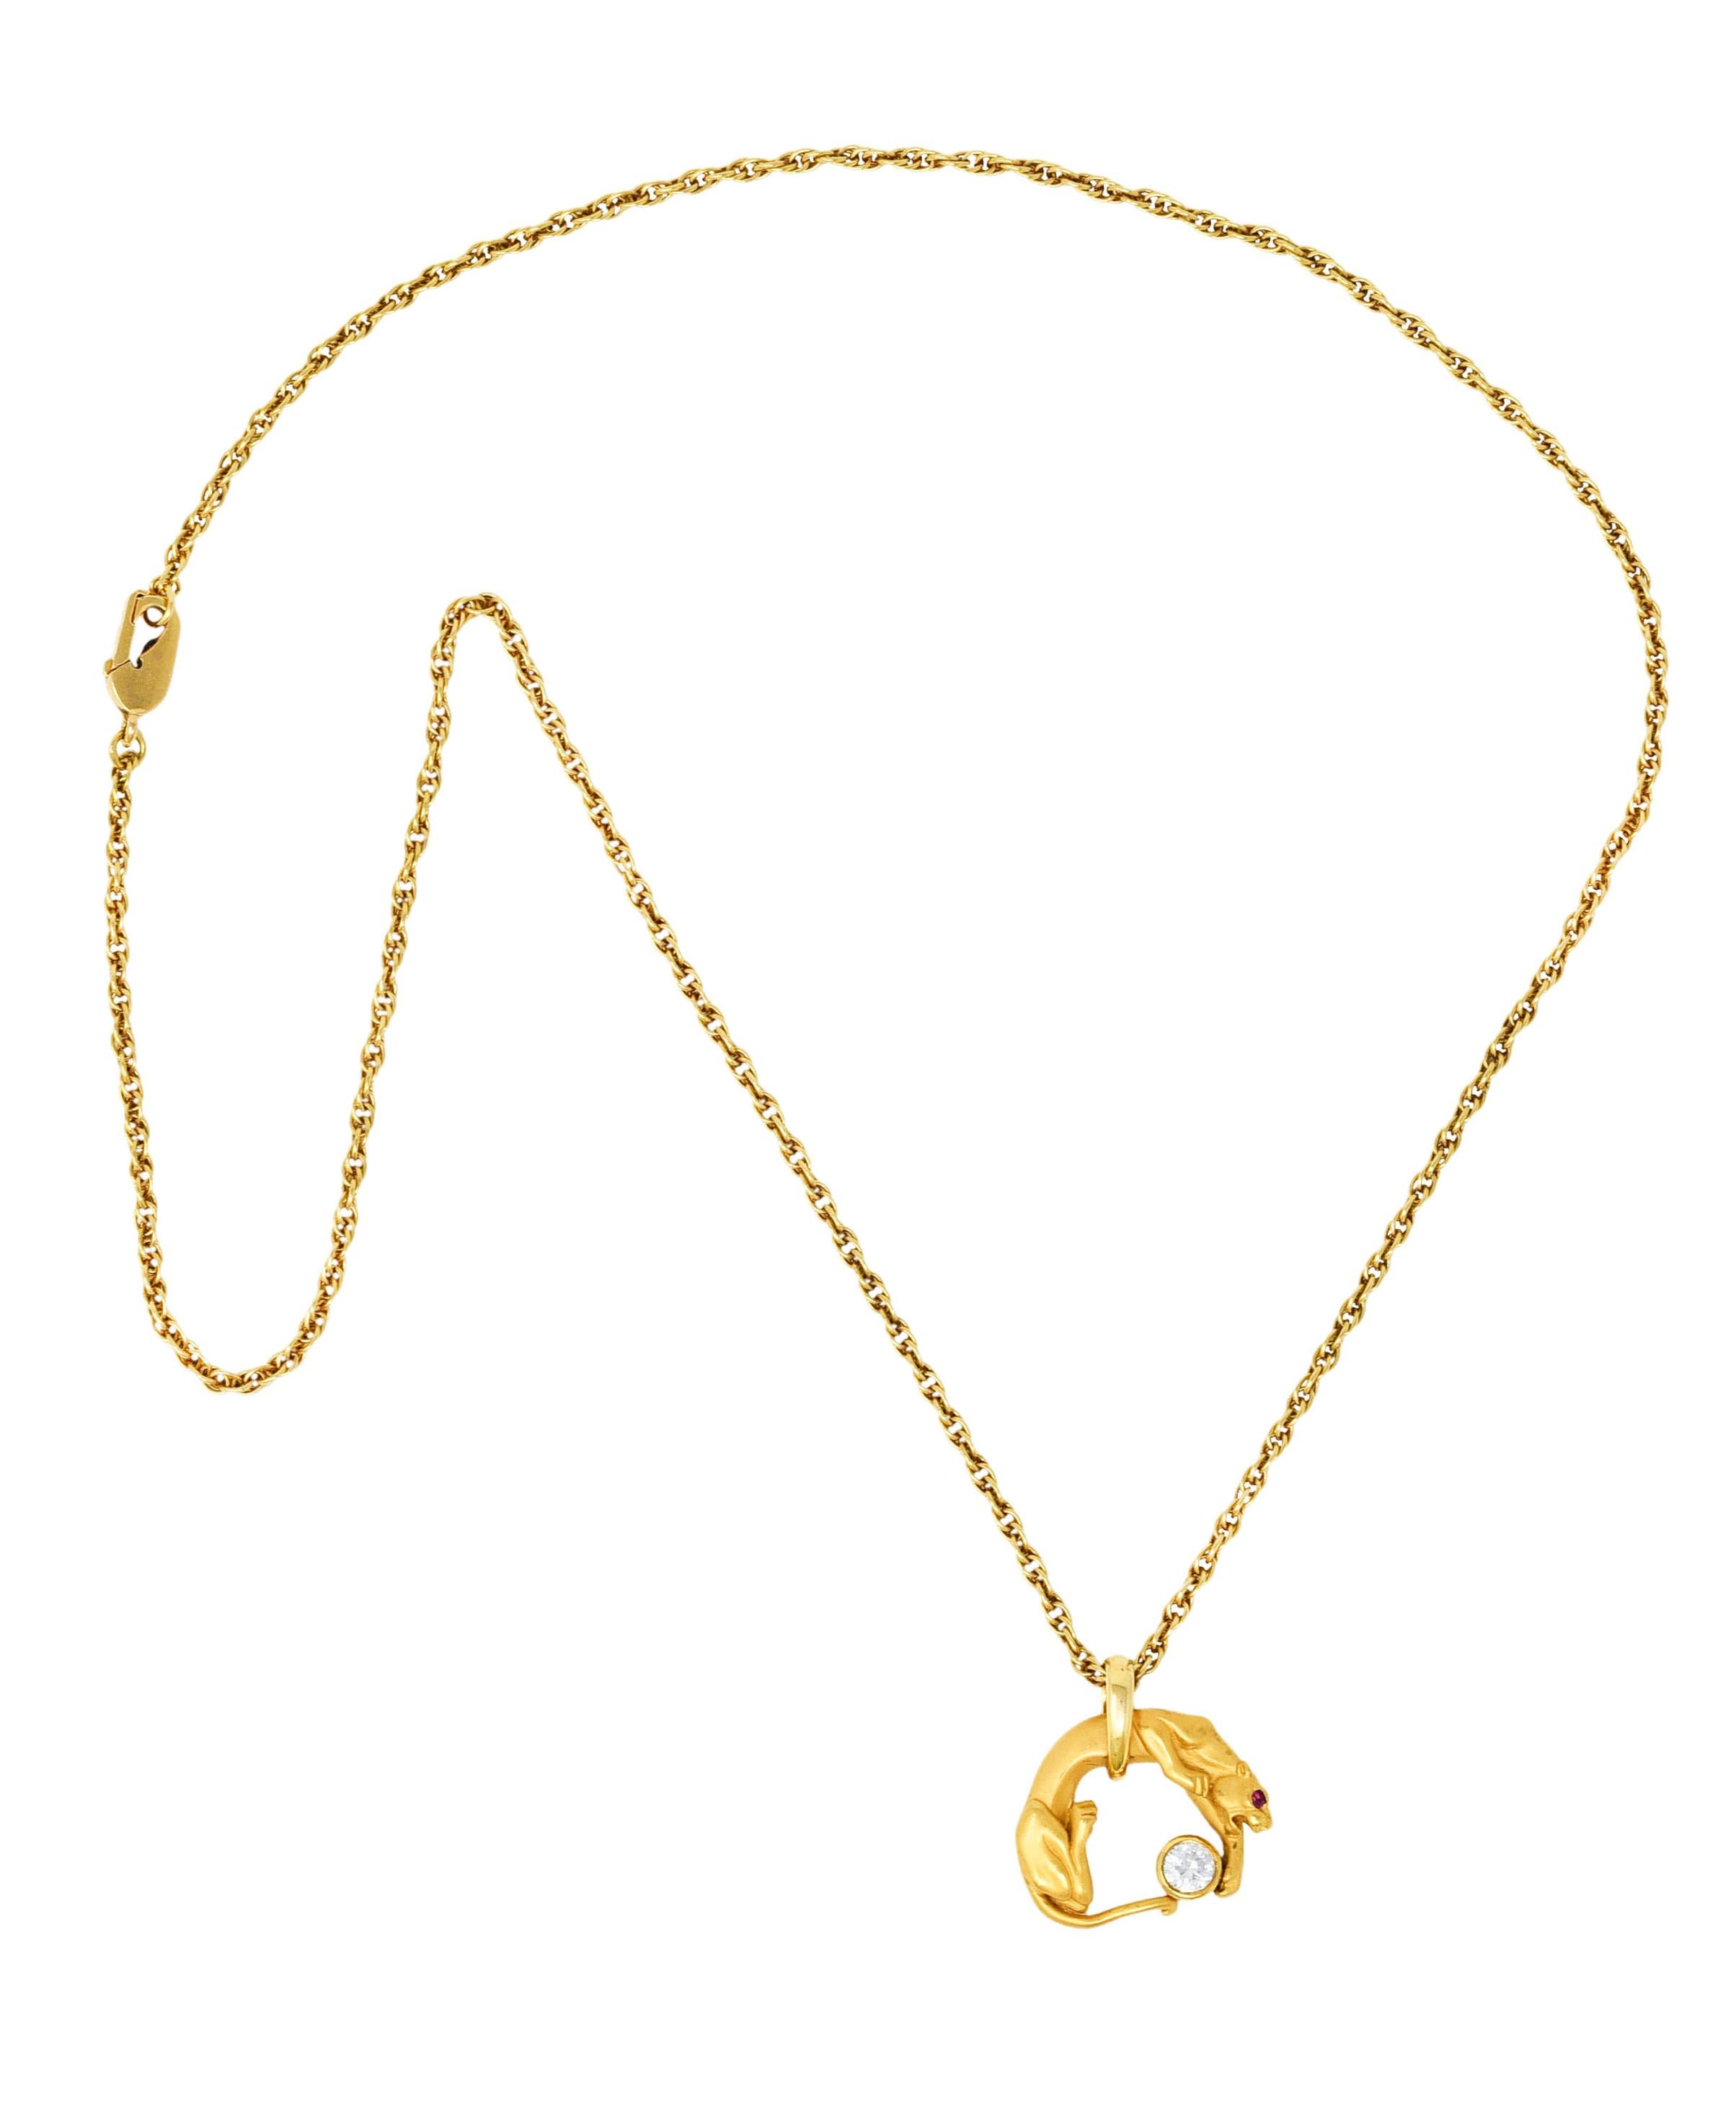 Spiga chain necklace suspends an arched panther pendant with a matte gold finish

Panther is accented with a ruby eye while pawing a bezel set round brilliant cut diamond

Weighing approximately 0.25 carat with G color and VS1 clarity

Completed by